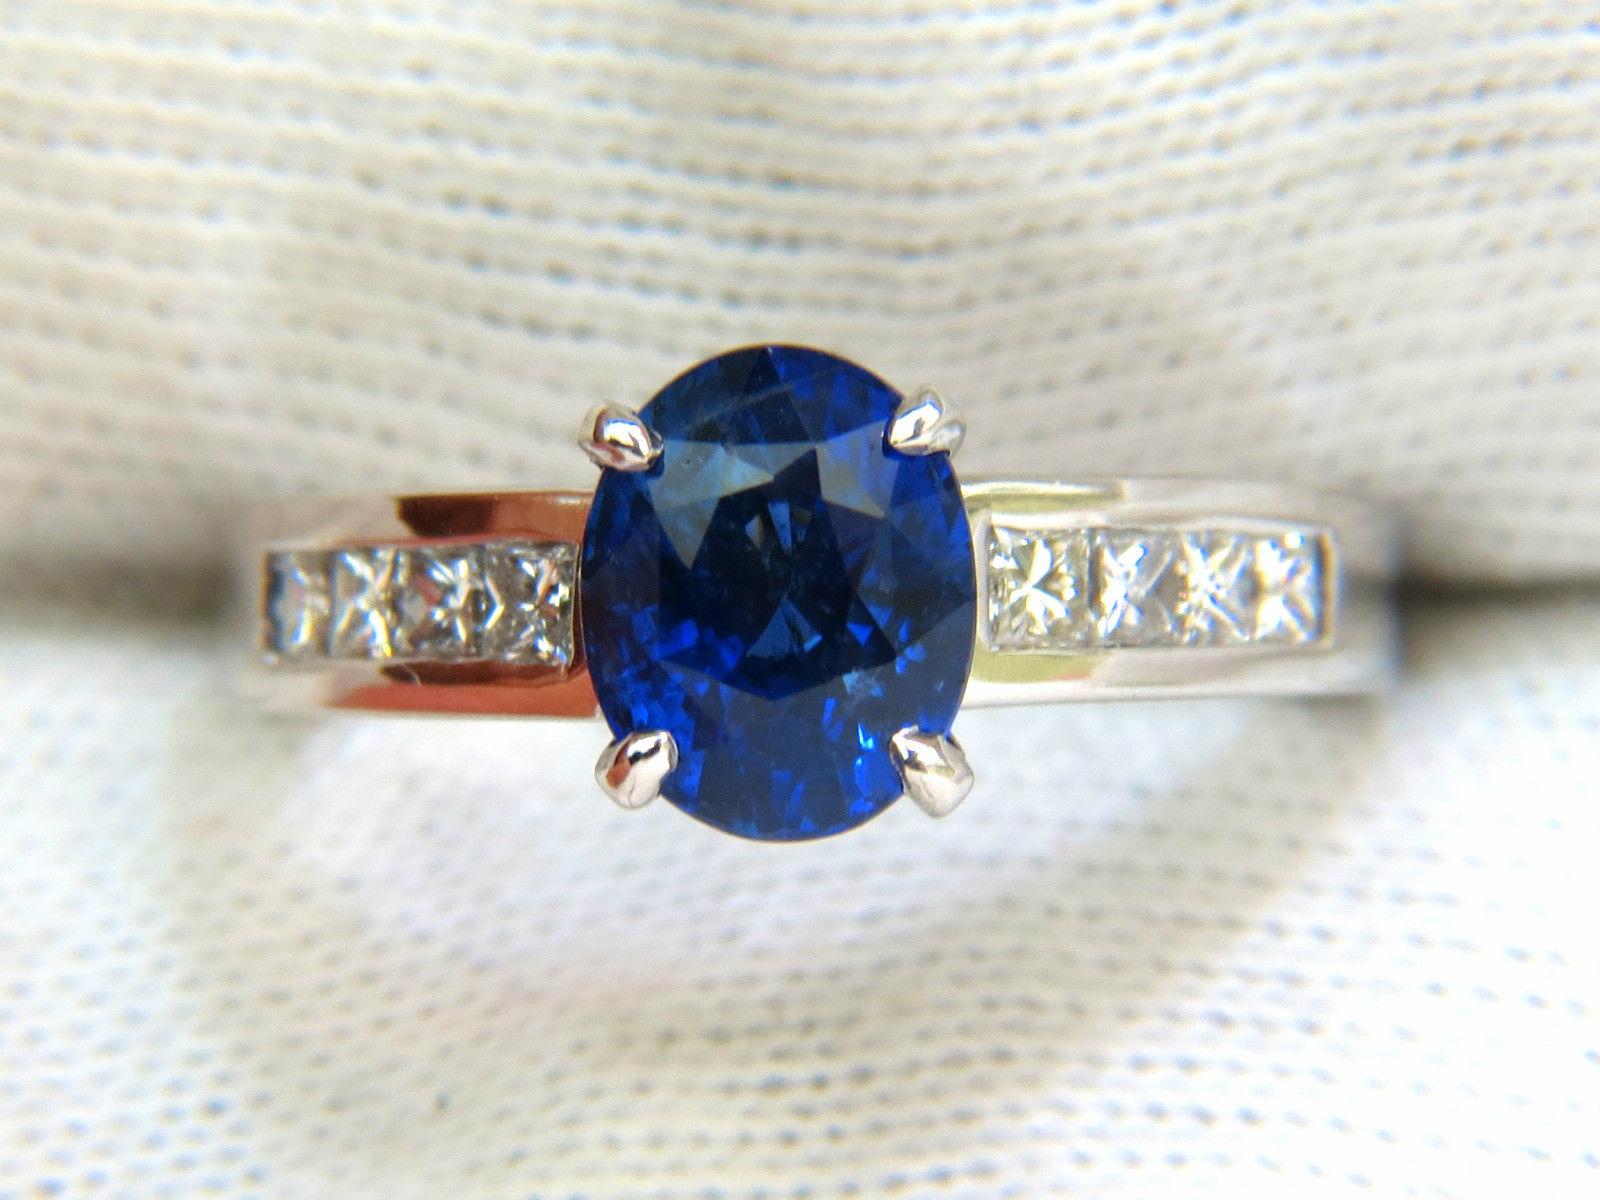 Gem Investiture.

2.27ct. GIA No Heat Sapphire

Classic Royal Top Gem Blue 

8.49 X 6.71 X 4.60

Vibrant Saturation

Fully Faceted Oval Shape for maximum brilliance

Clean Clarity and transparent

The Fine No Heat.

(Please see report